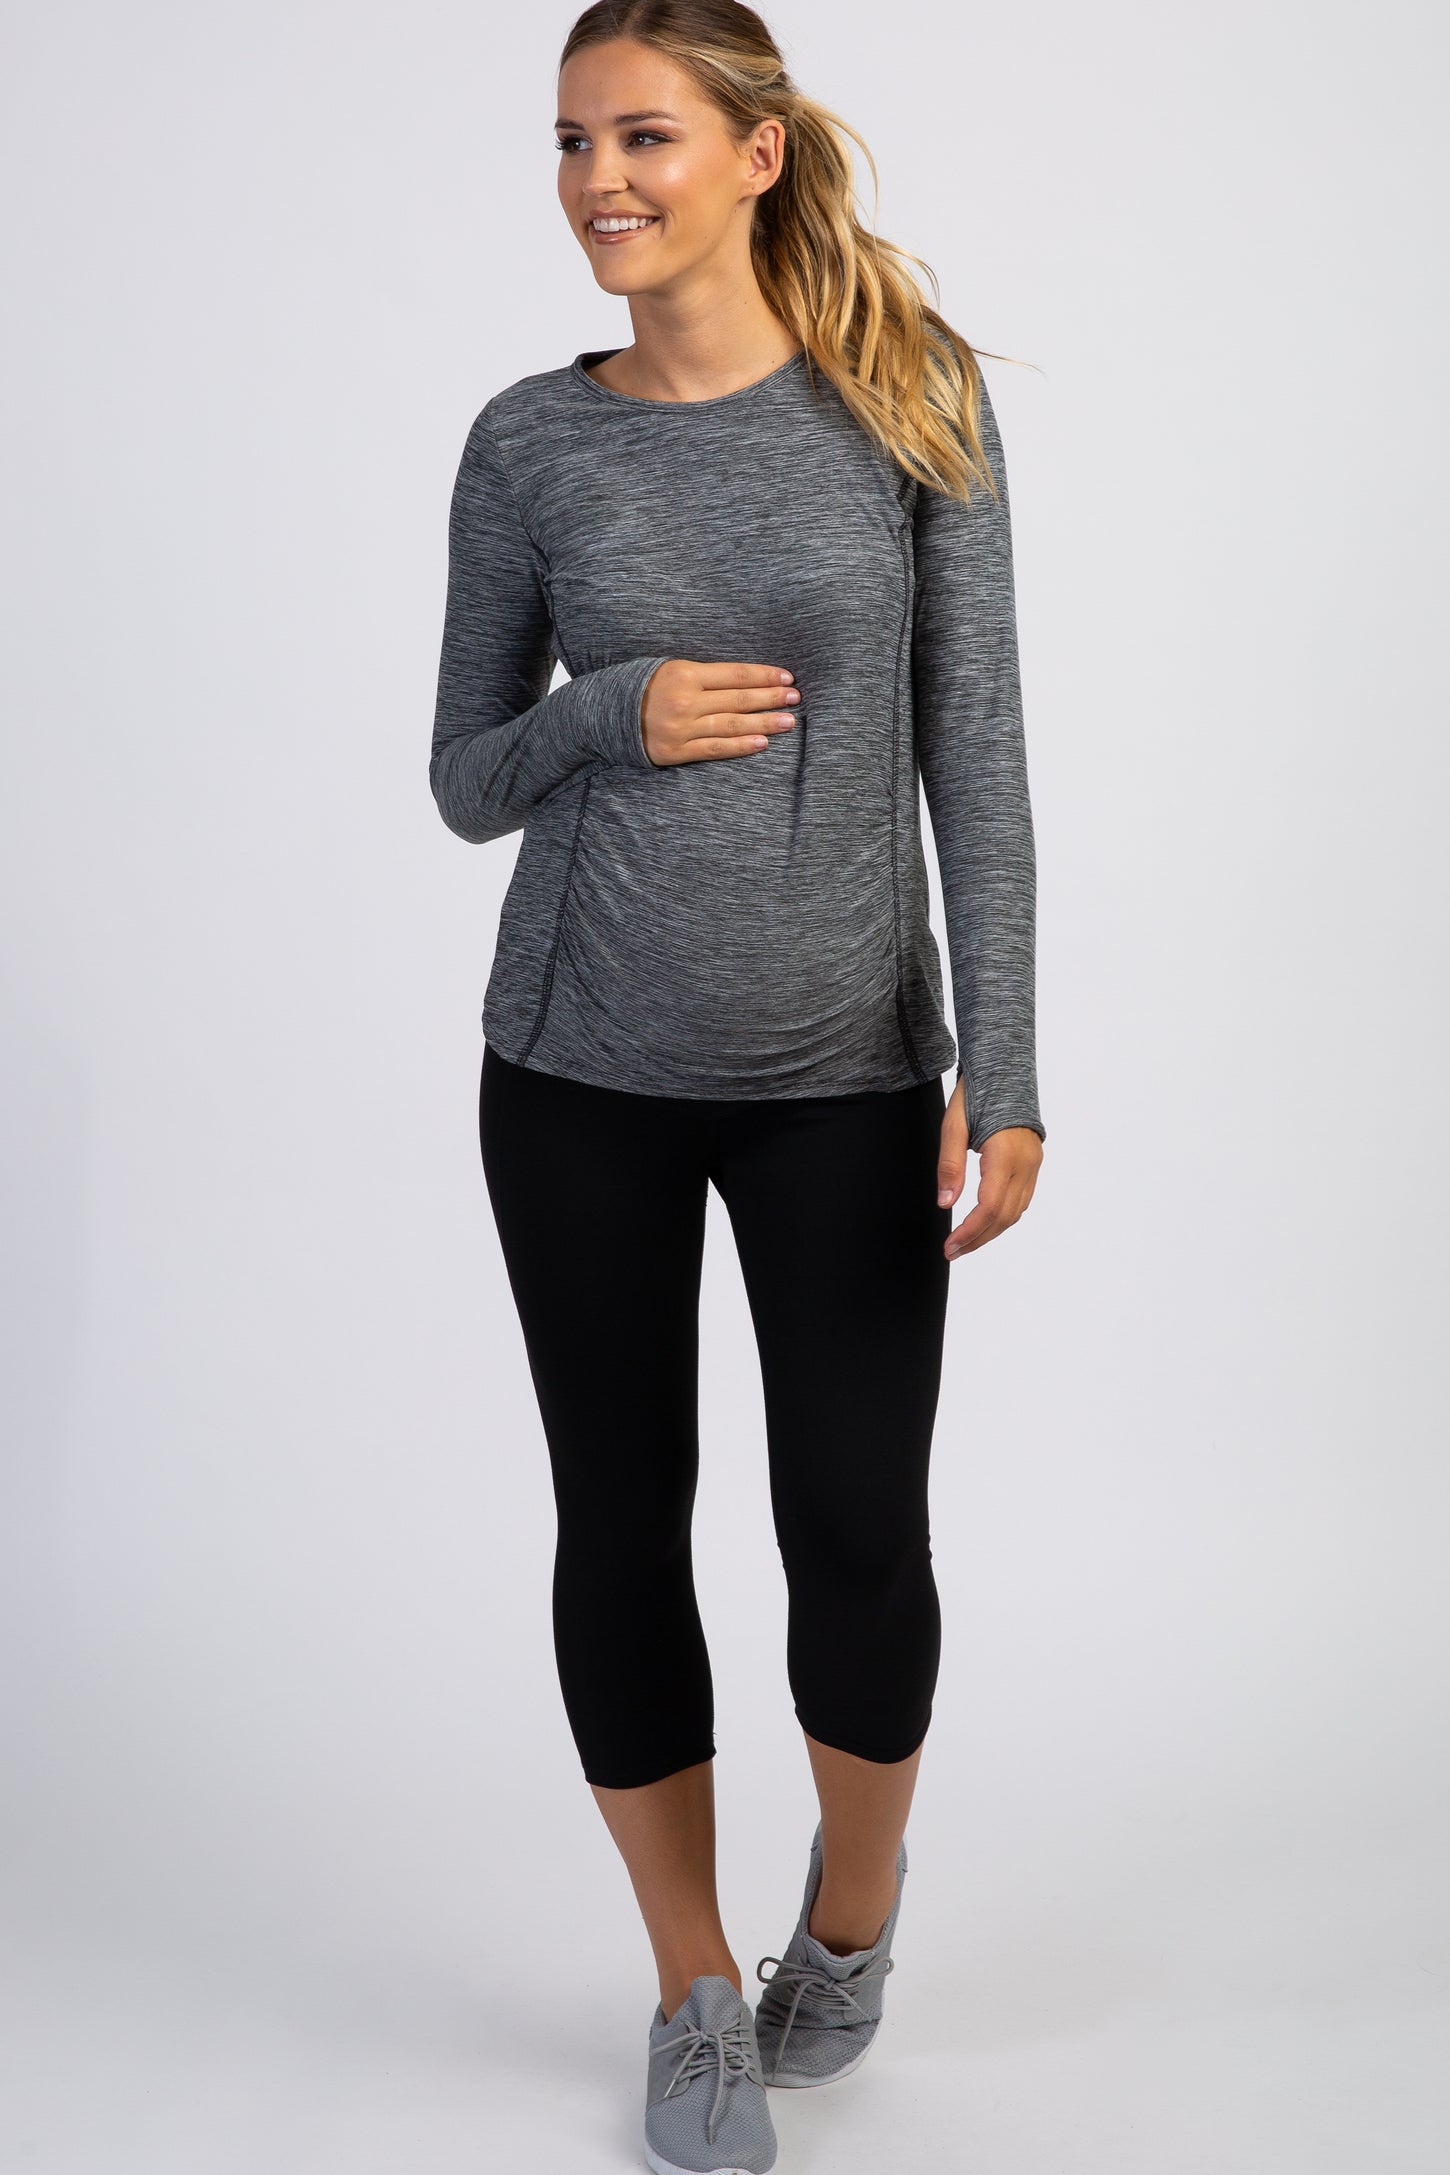 PinkBlush Heather Grey Ruched Long Sleeve Maternity Active Top